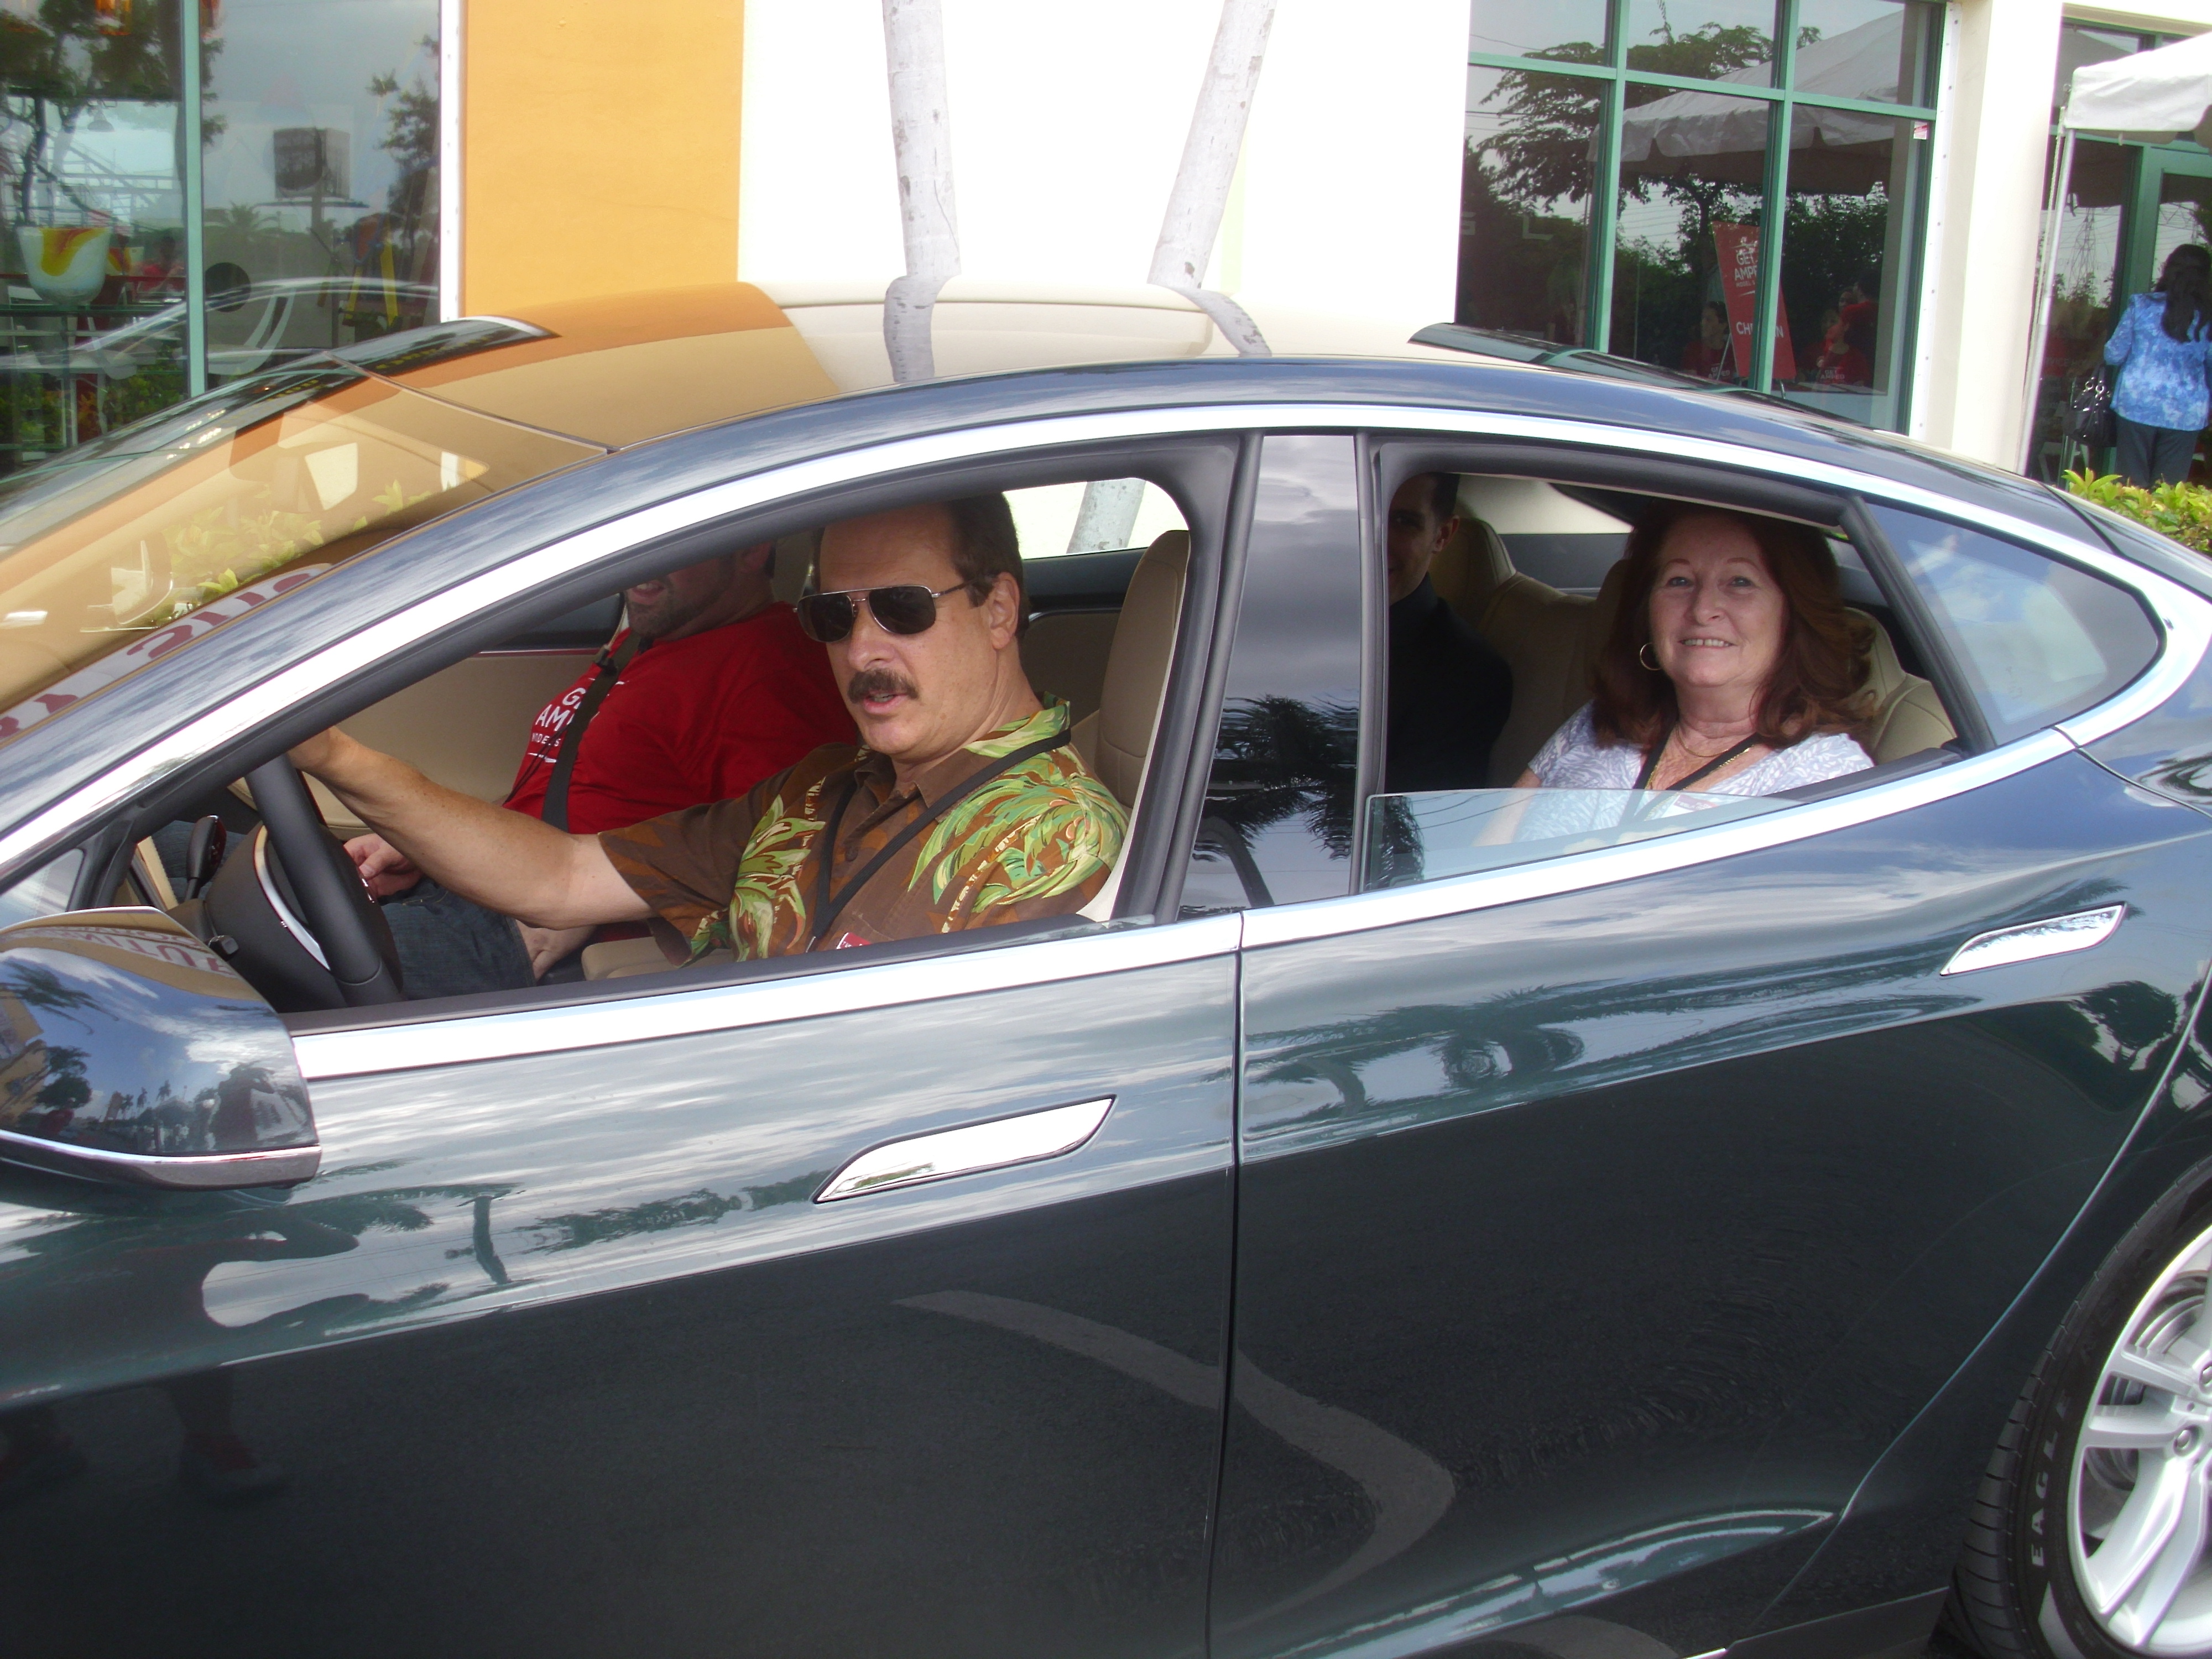 Larry & Mary Ellen Chanin at the GET AMPED test drive event in Dania Beach